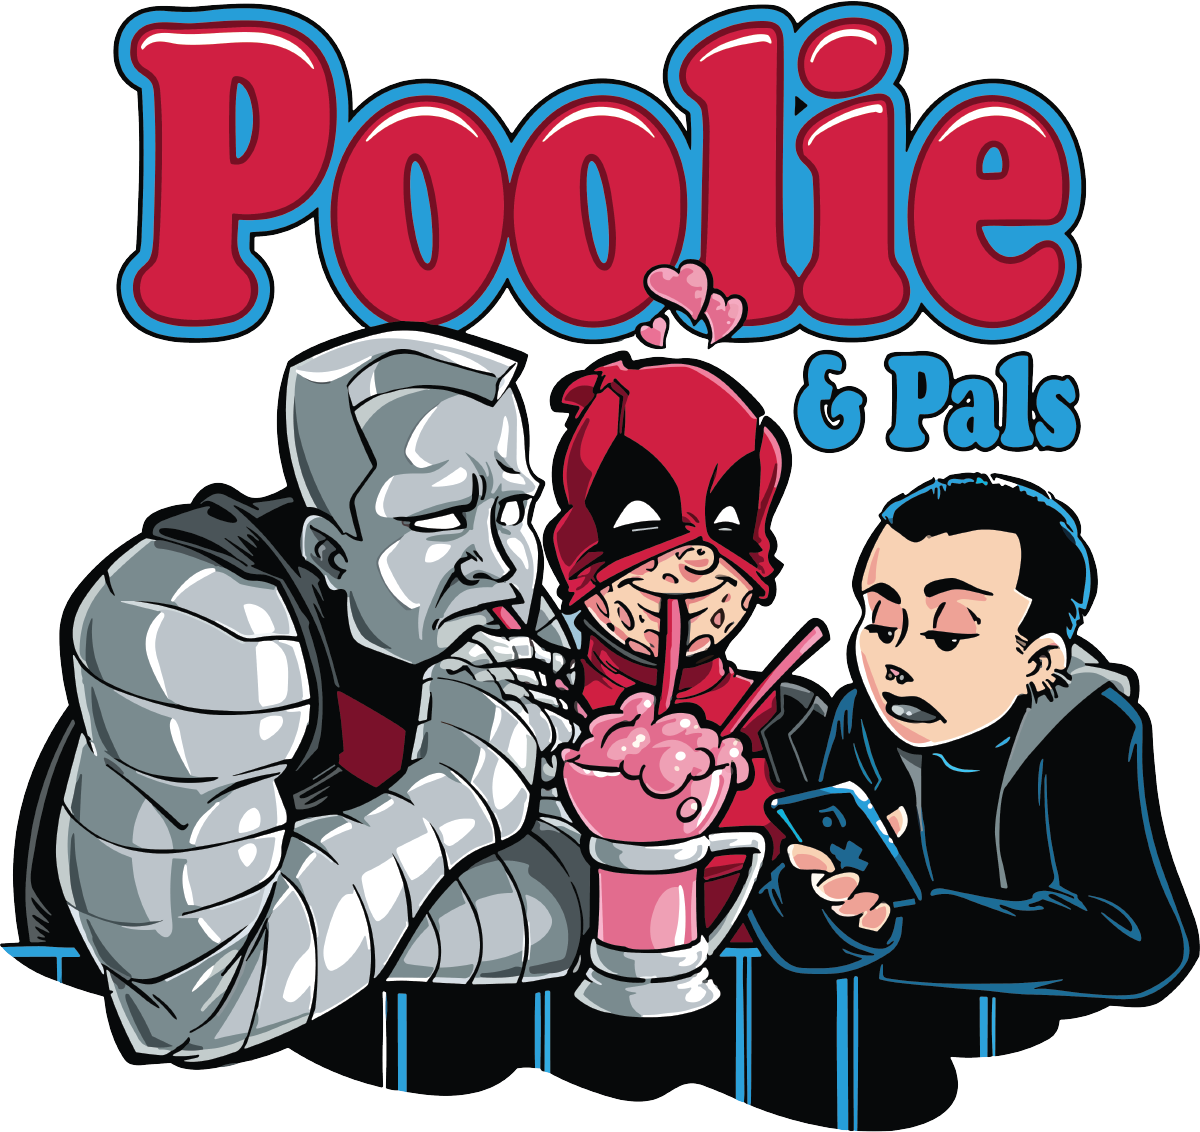 Poolie & The Pals